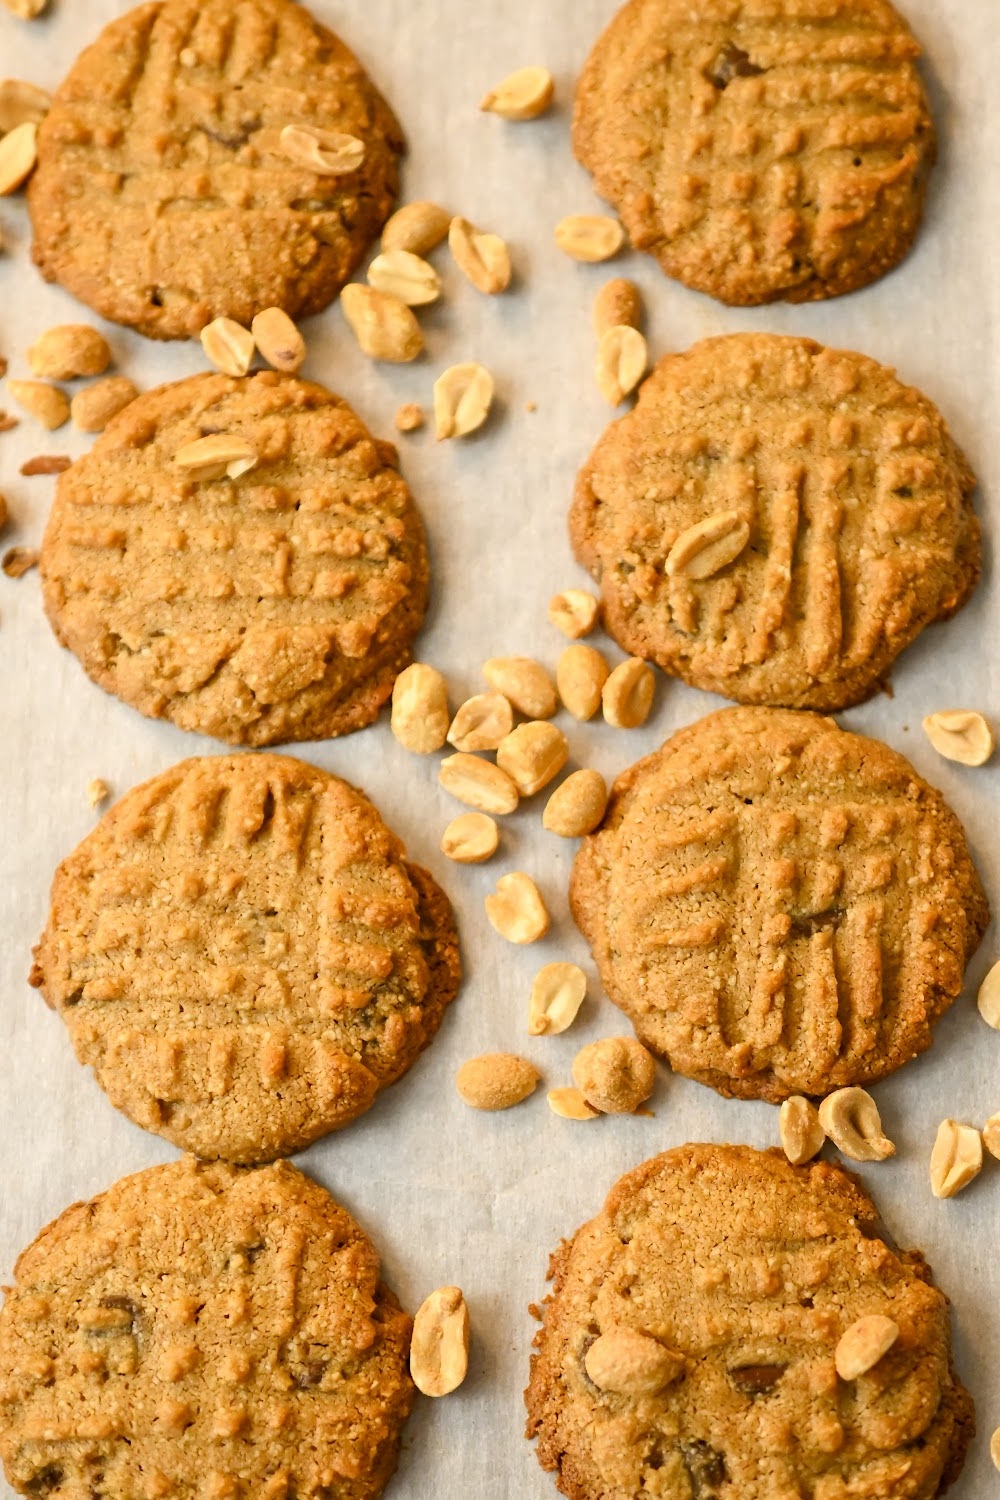 keto-friendly peanut butter chocolate chip cookies baked on a parchment lined cookie sheet